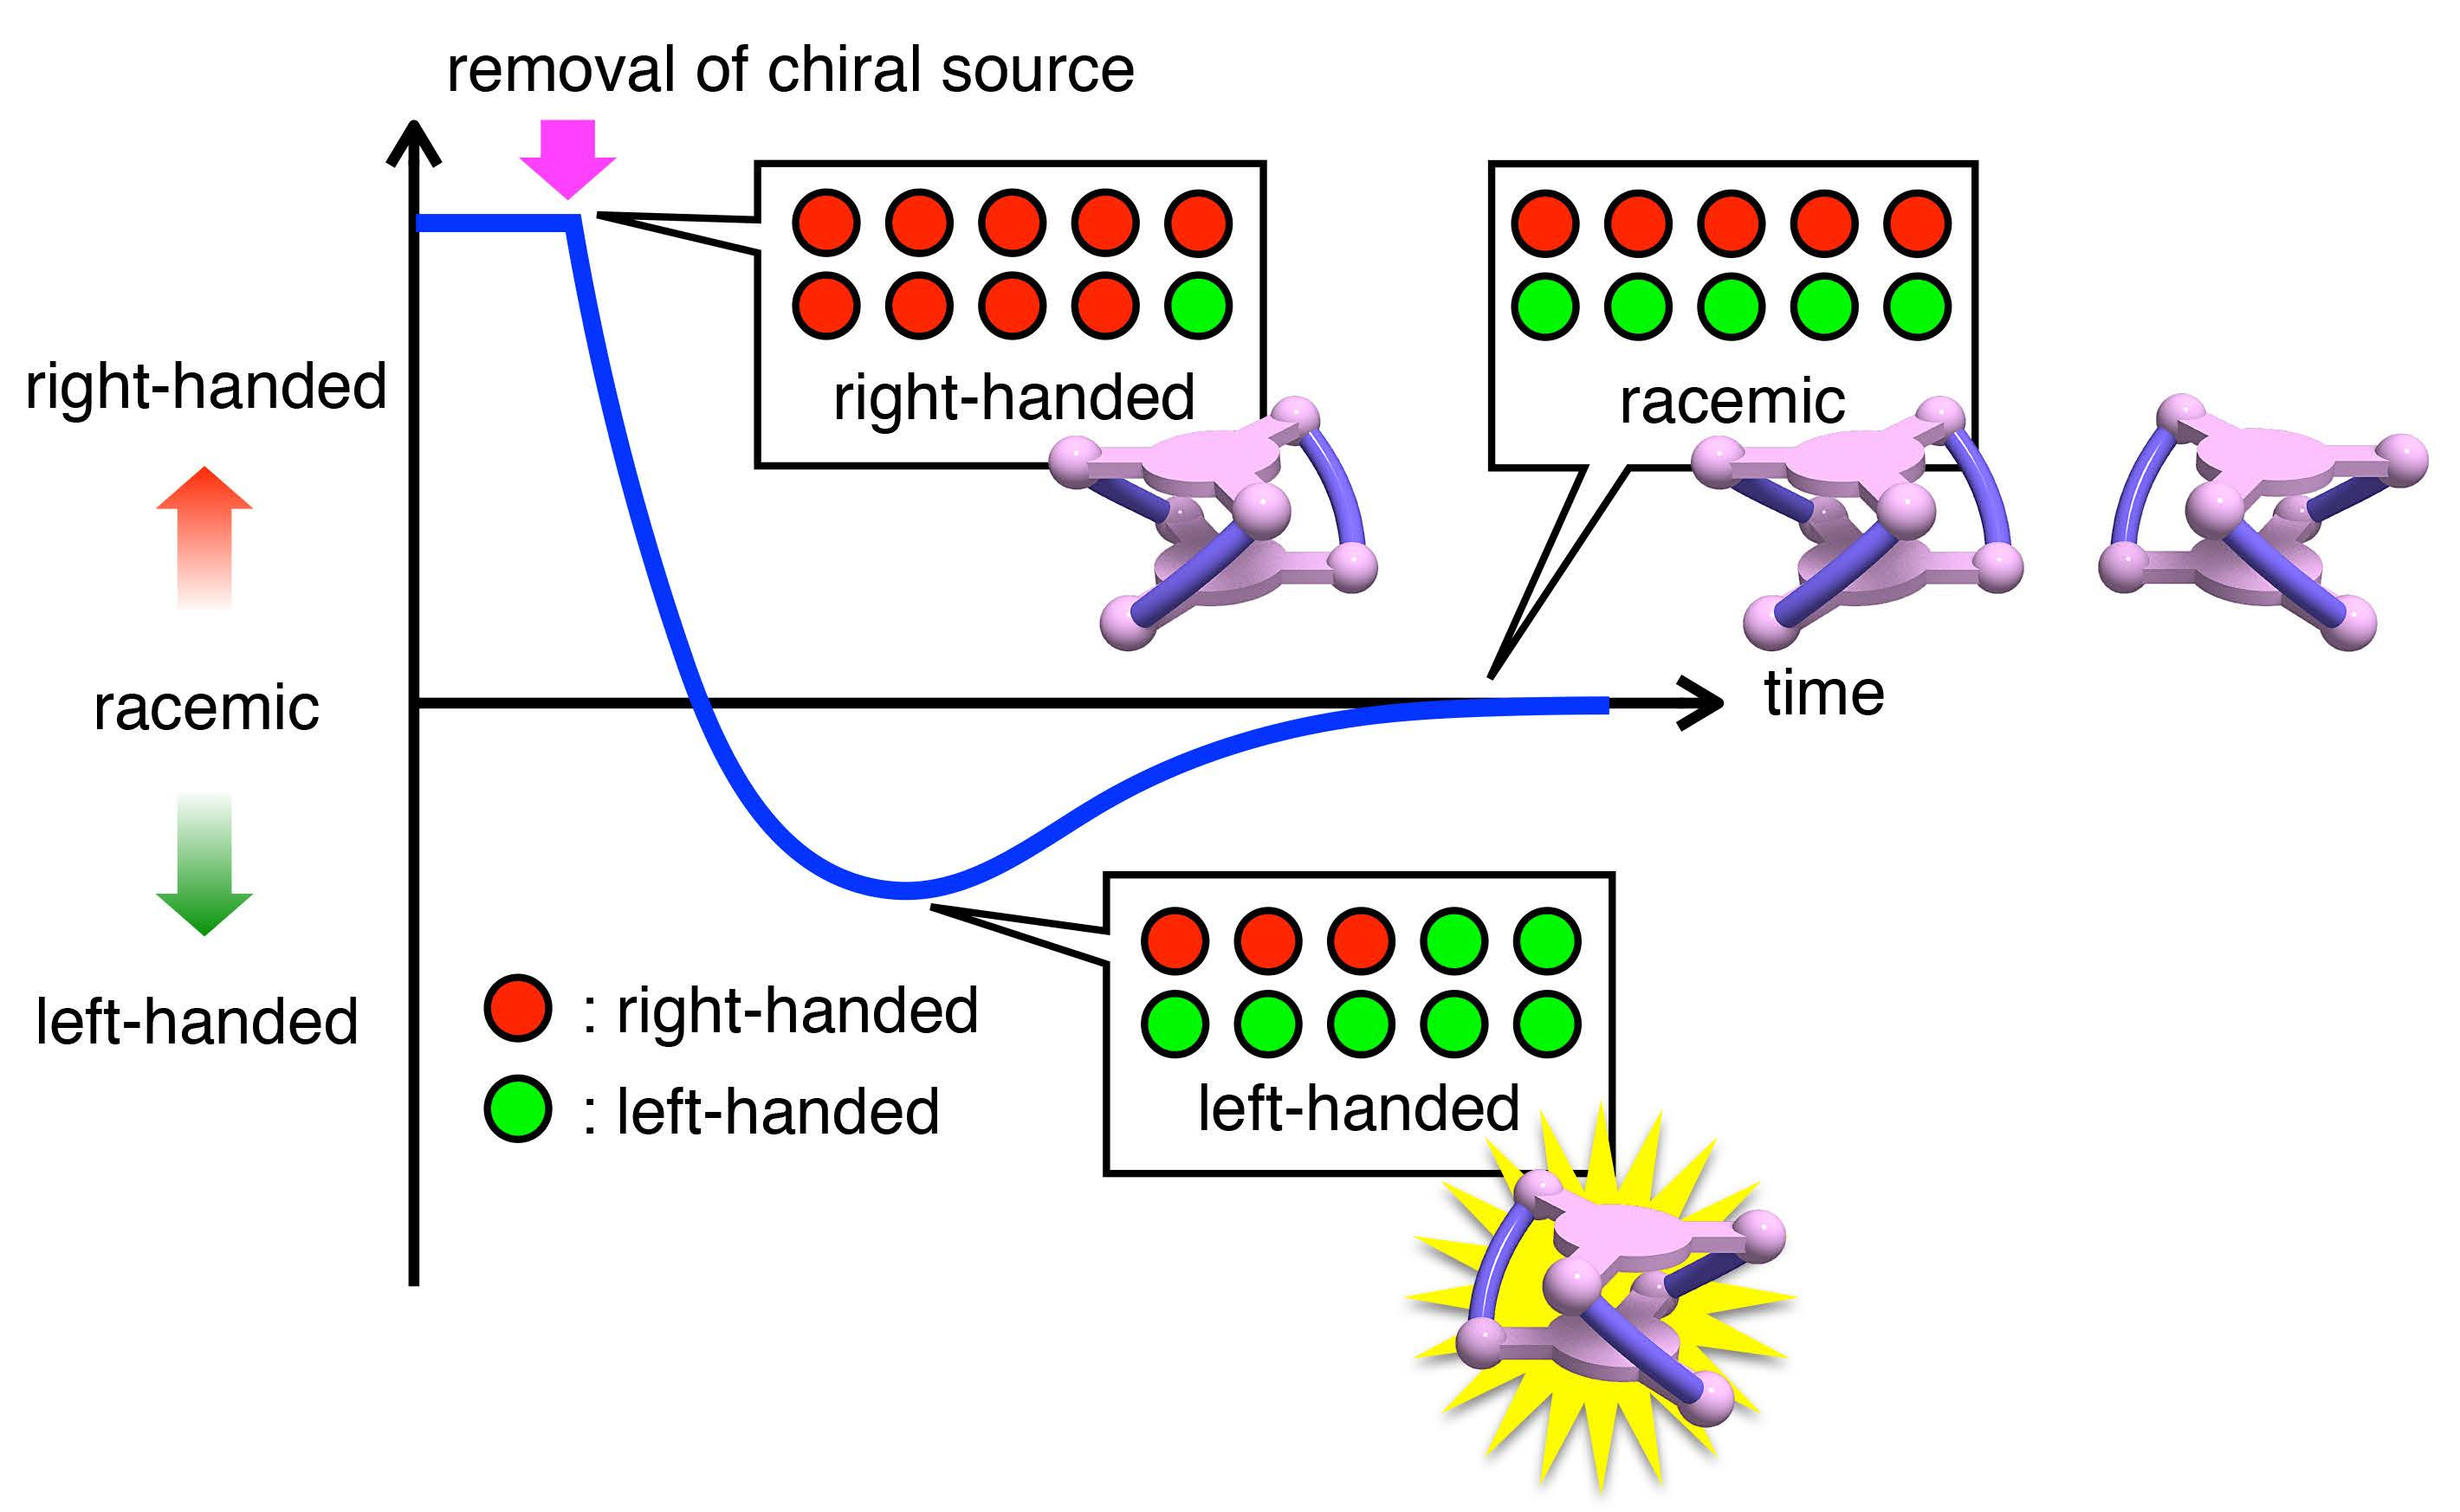 A right-handed helical cobalt(III) complex underwent the chirality inversion to give the left-handed form before complete racemization upon removal of the chiral source